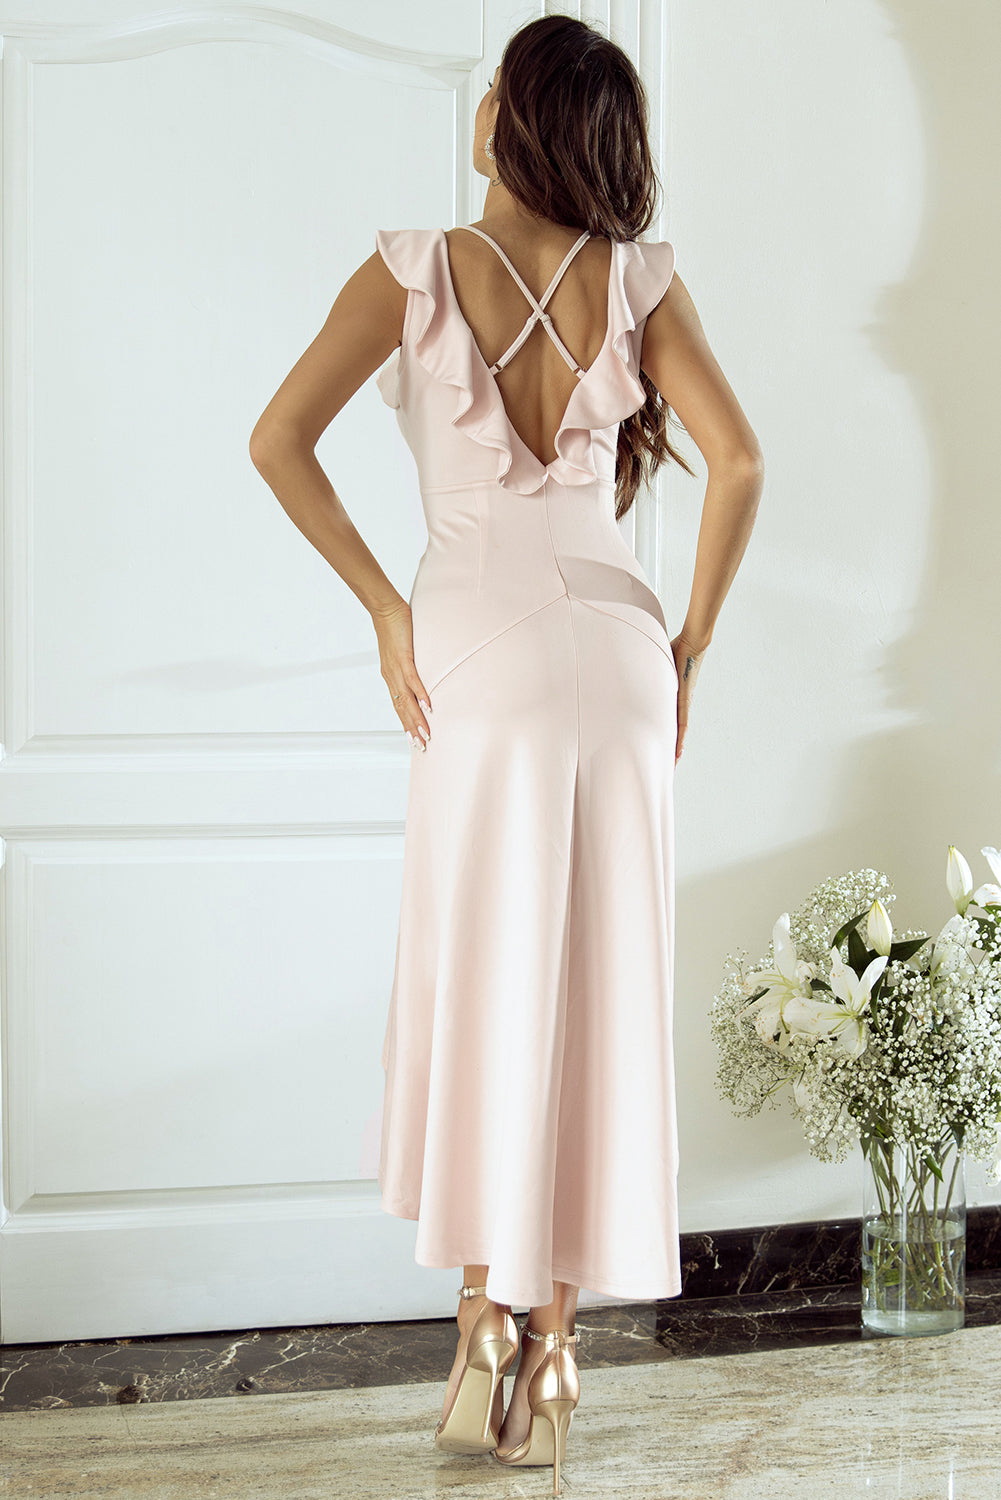 Apricot Pink Crossed Backless Mermaid Trim Wedding Party Dress